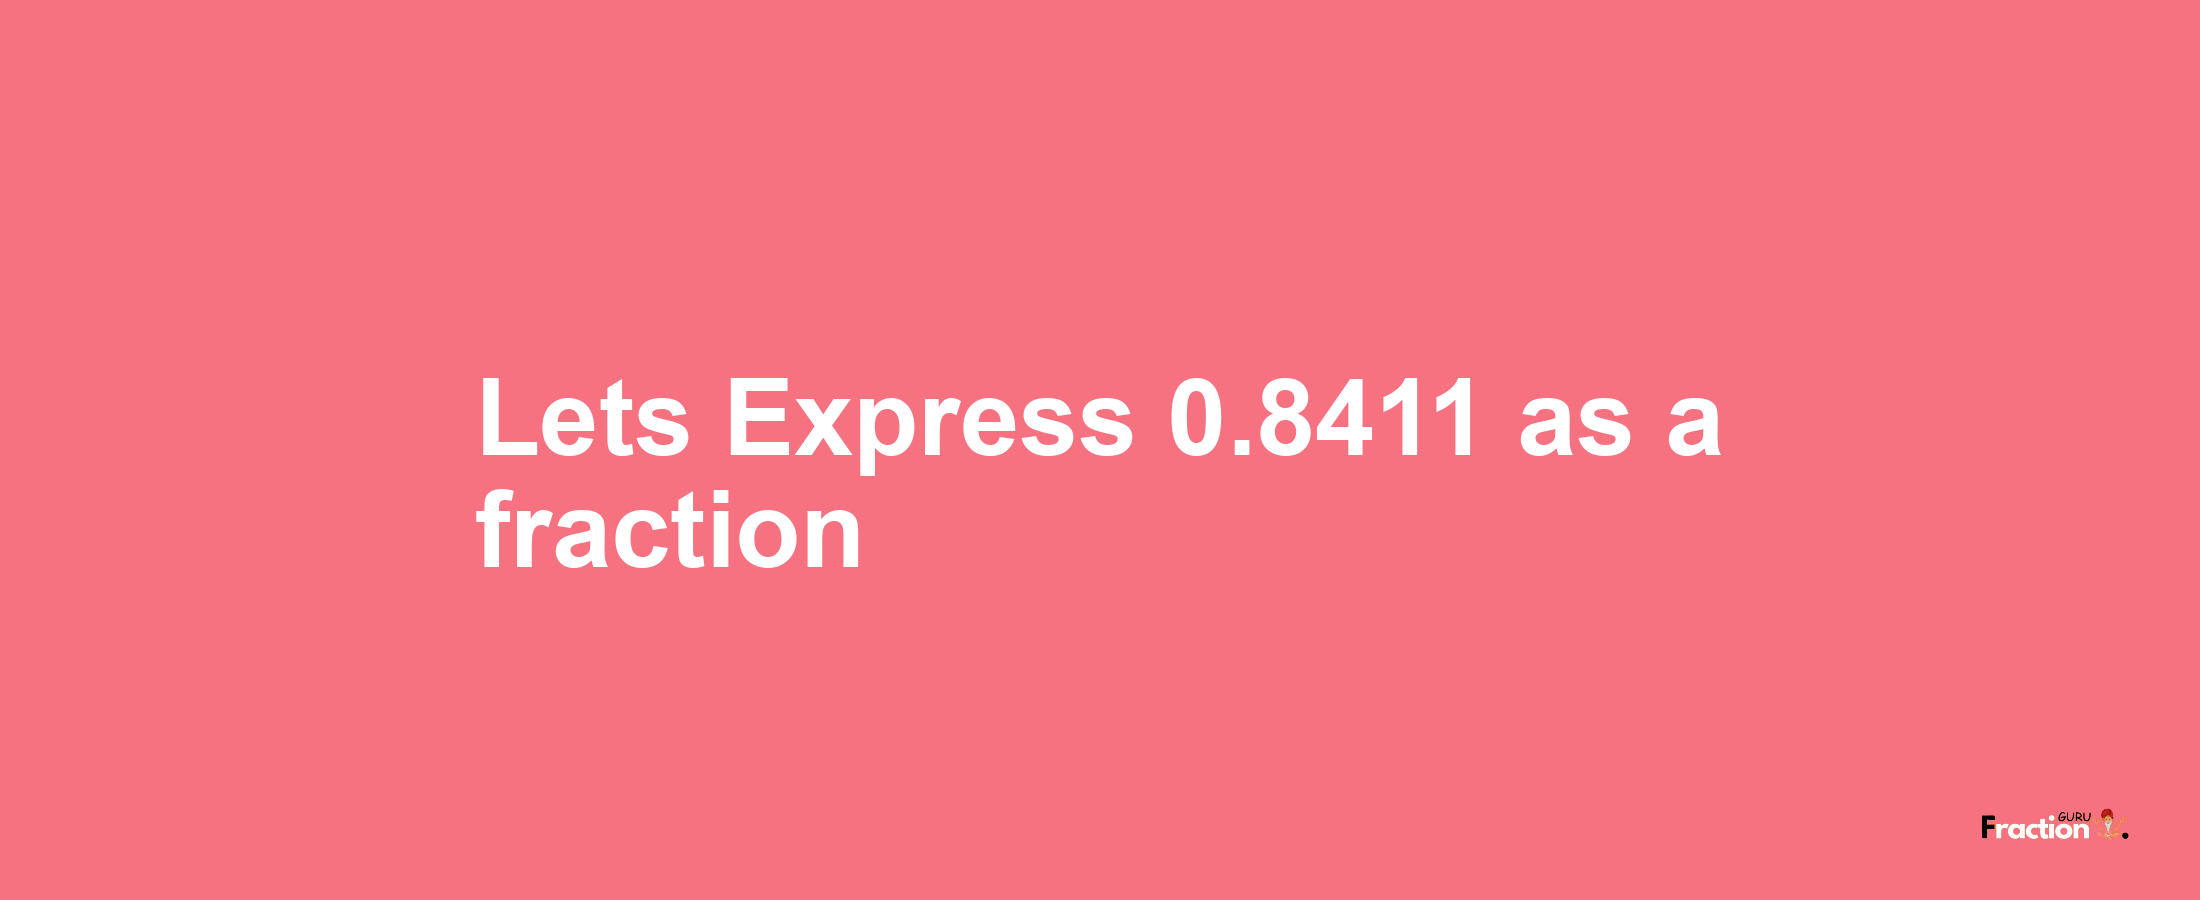 Lets Express 0.8411 as afraction